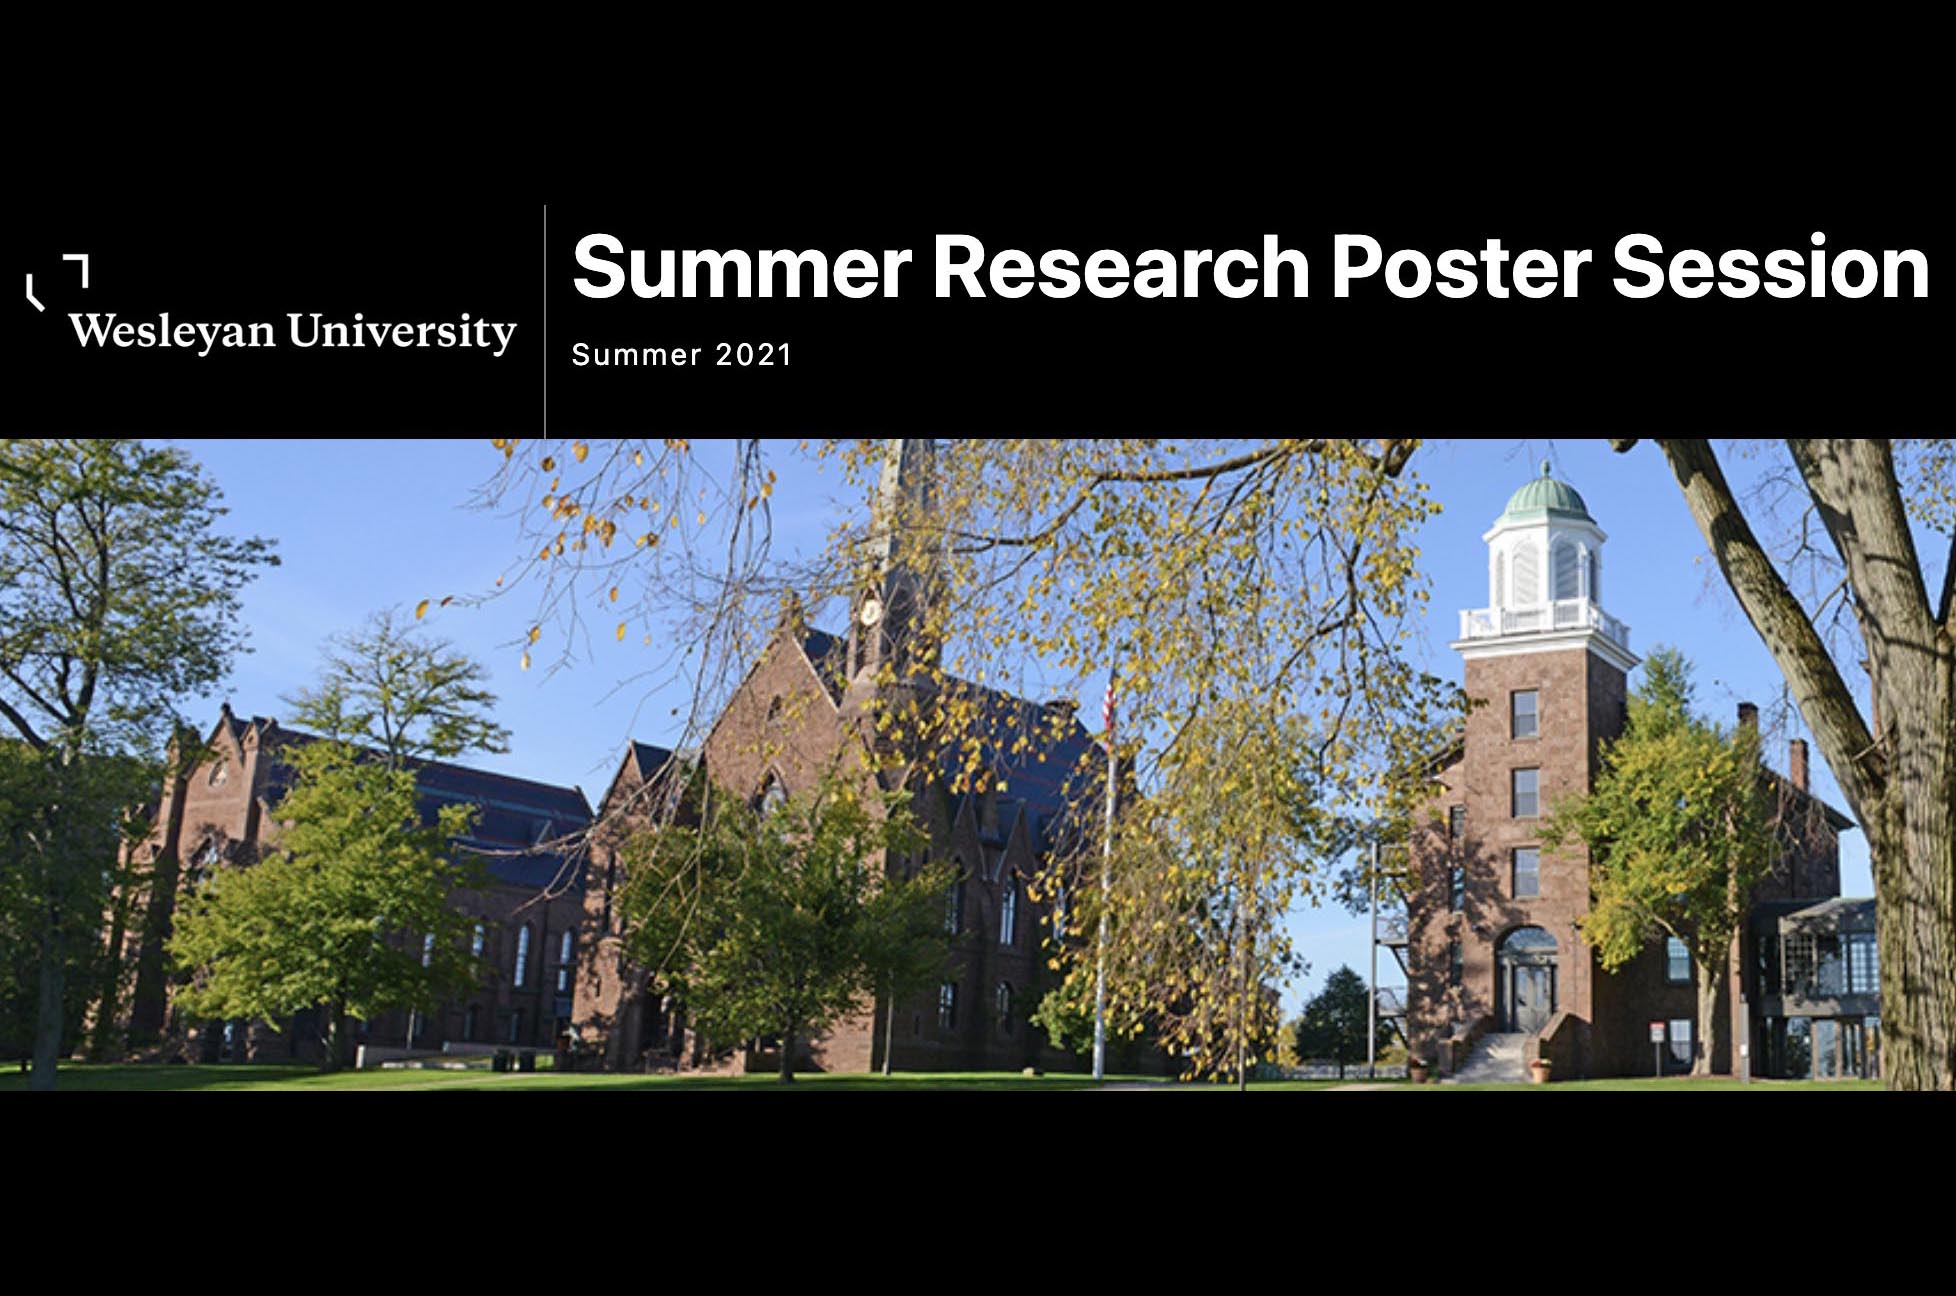 A picture of buildings on the Wesleyan University campus to advertise the poster session of the 2021 summer research program.